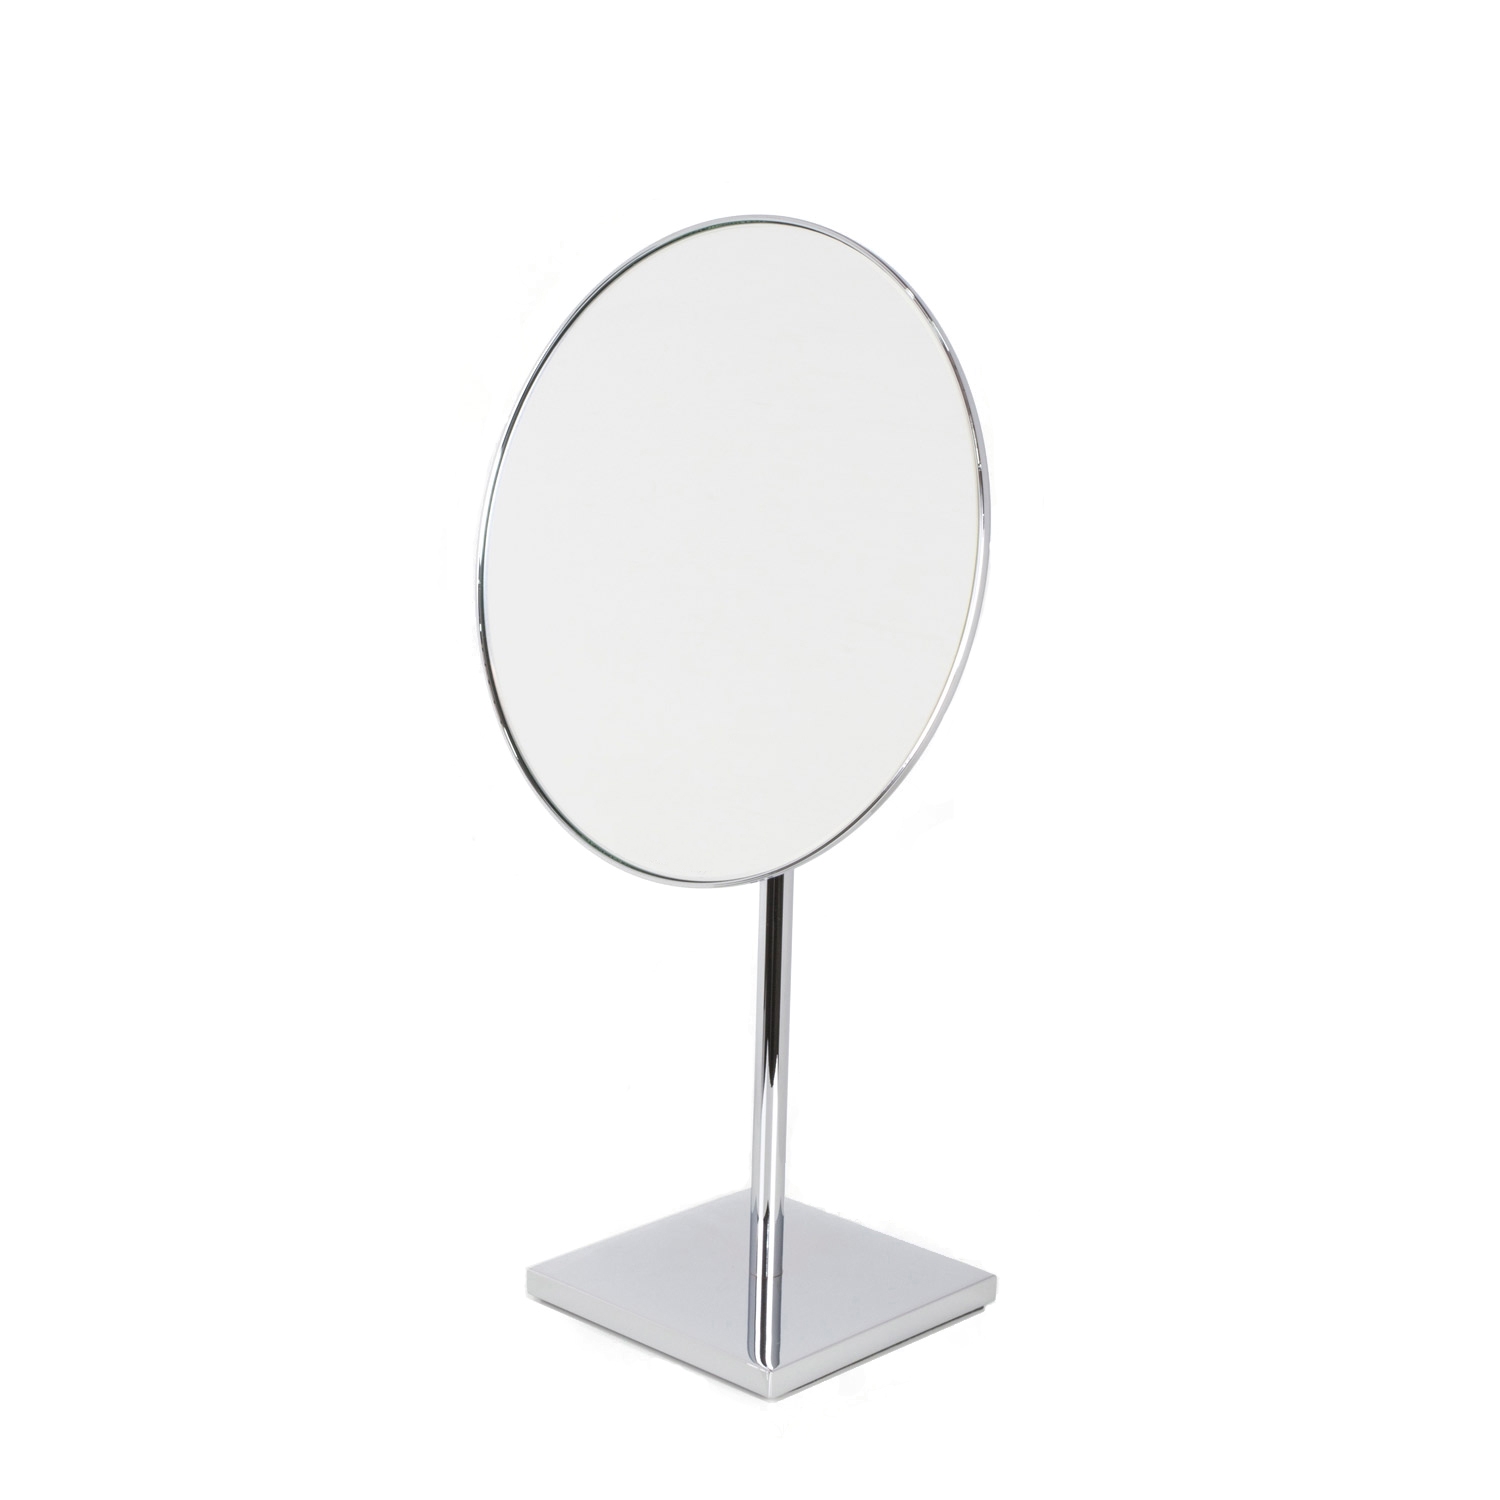 Discolo 39-1 x3 by 9.1 Dia. x 15.8 Free Standing Magnifying Mirror, in Chromed Plated Brass Structure and Frame in Chromed Plated Abs